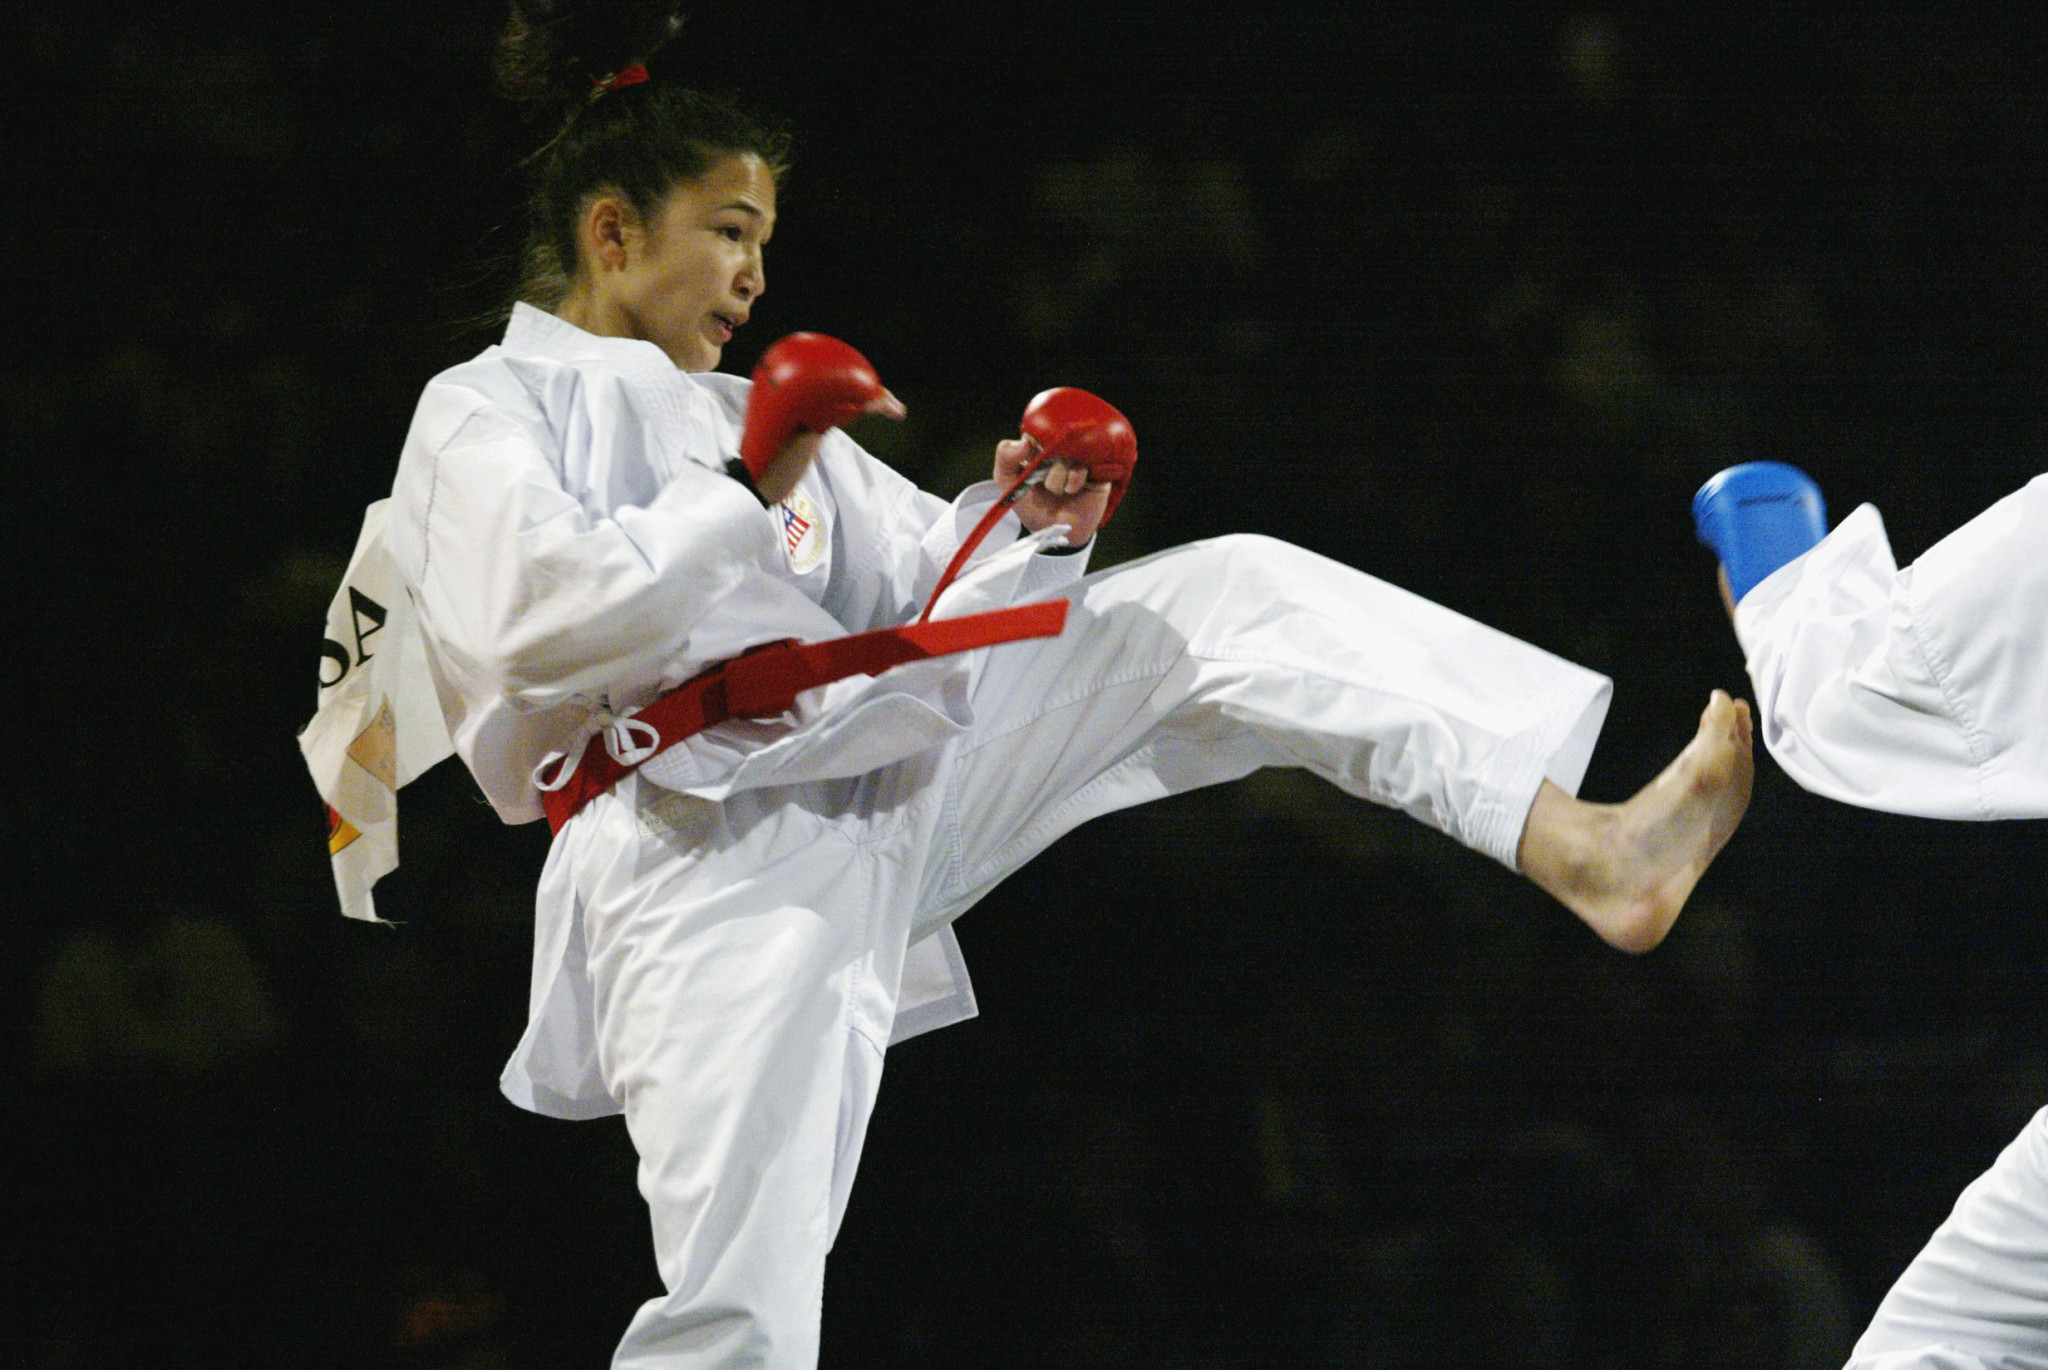 Elisa Au is a leading figure in the WKF's Olympic efforts ©Getty images